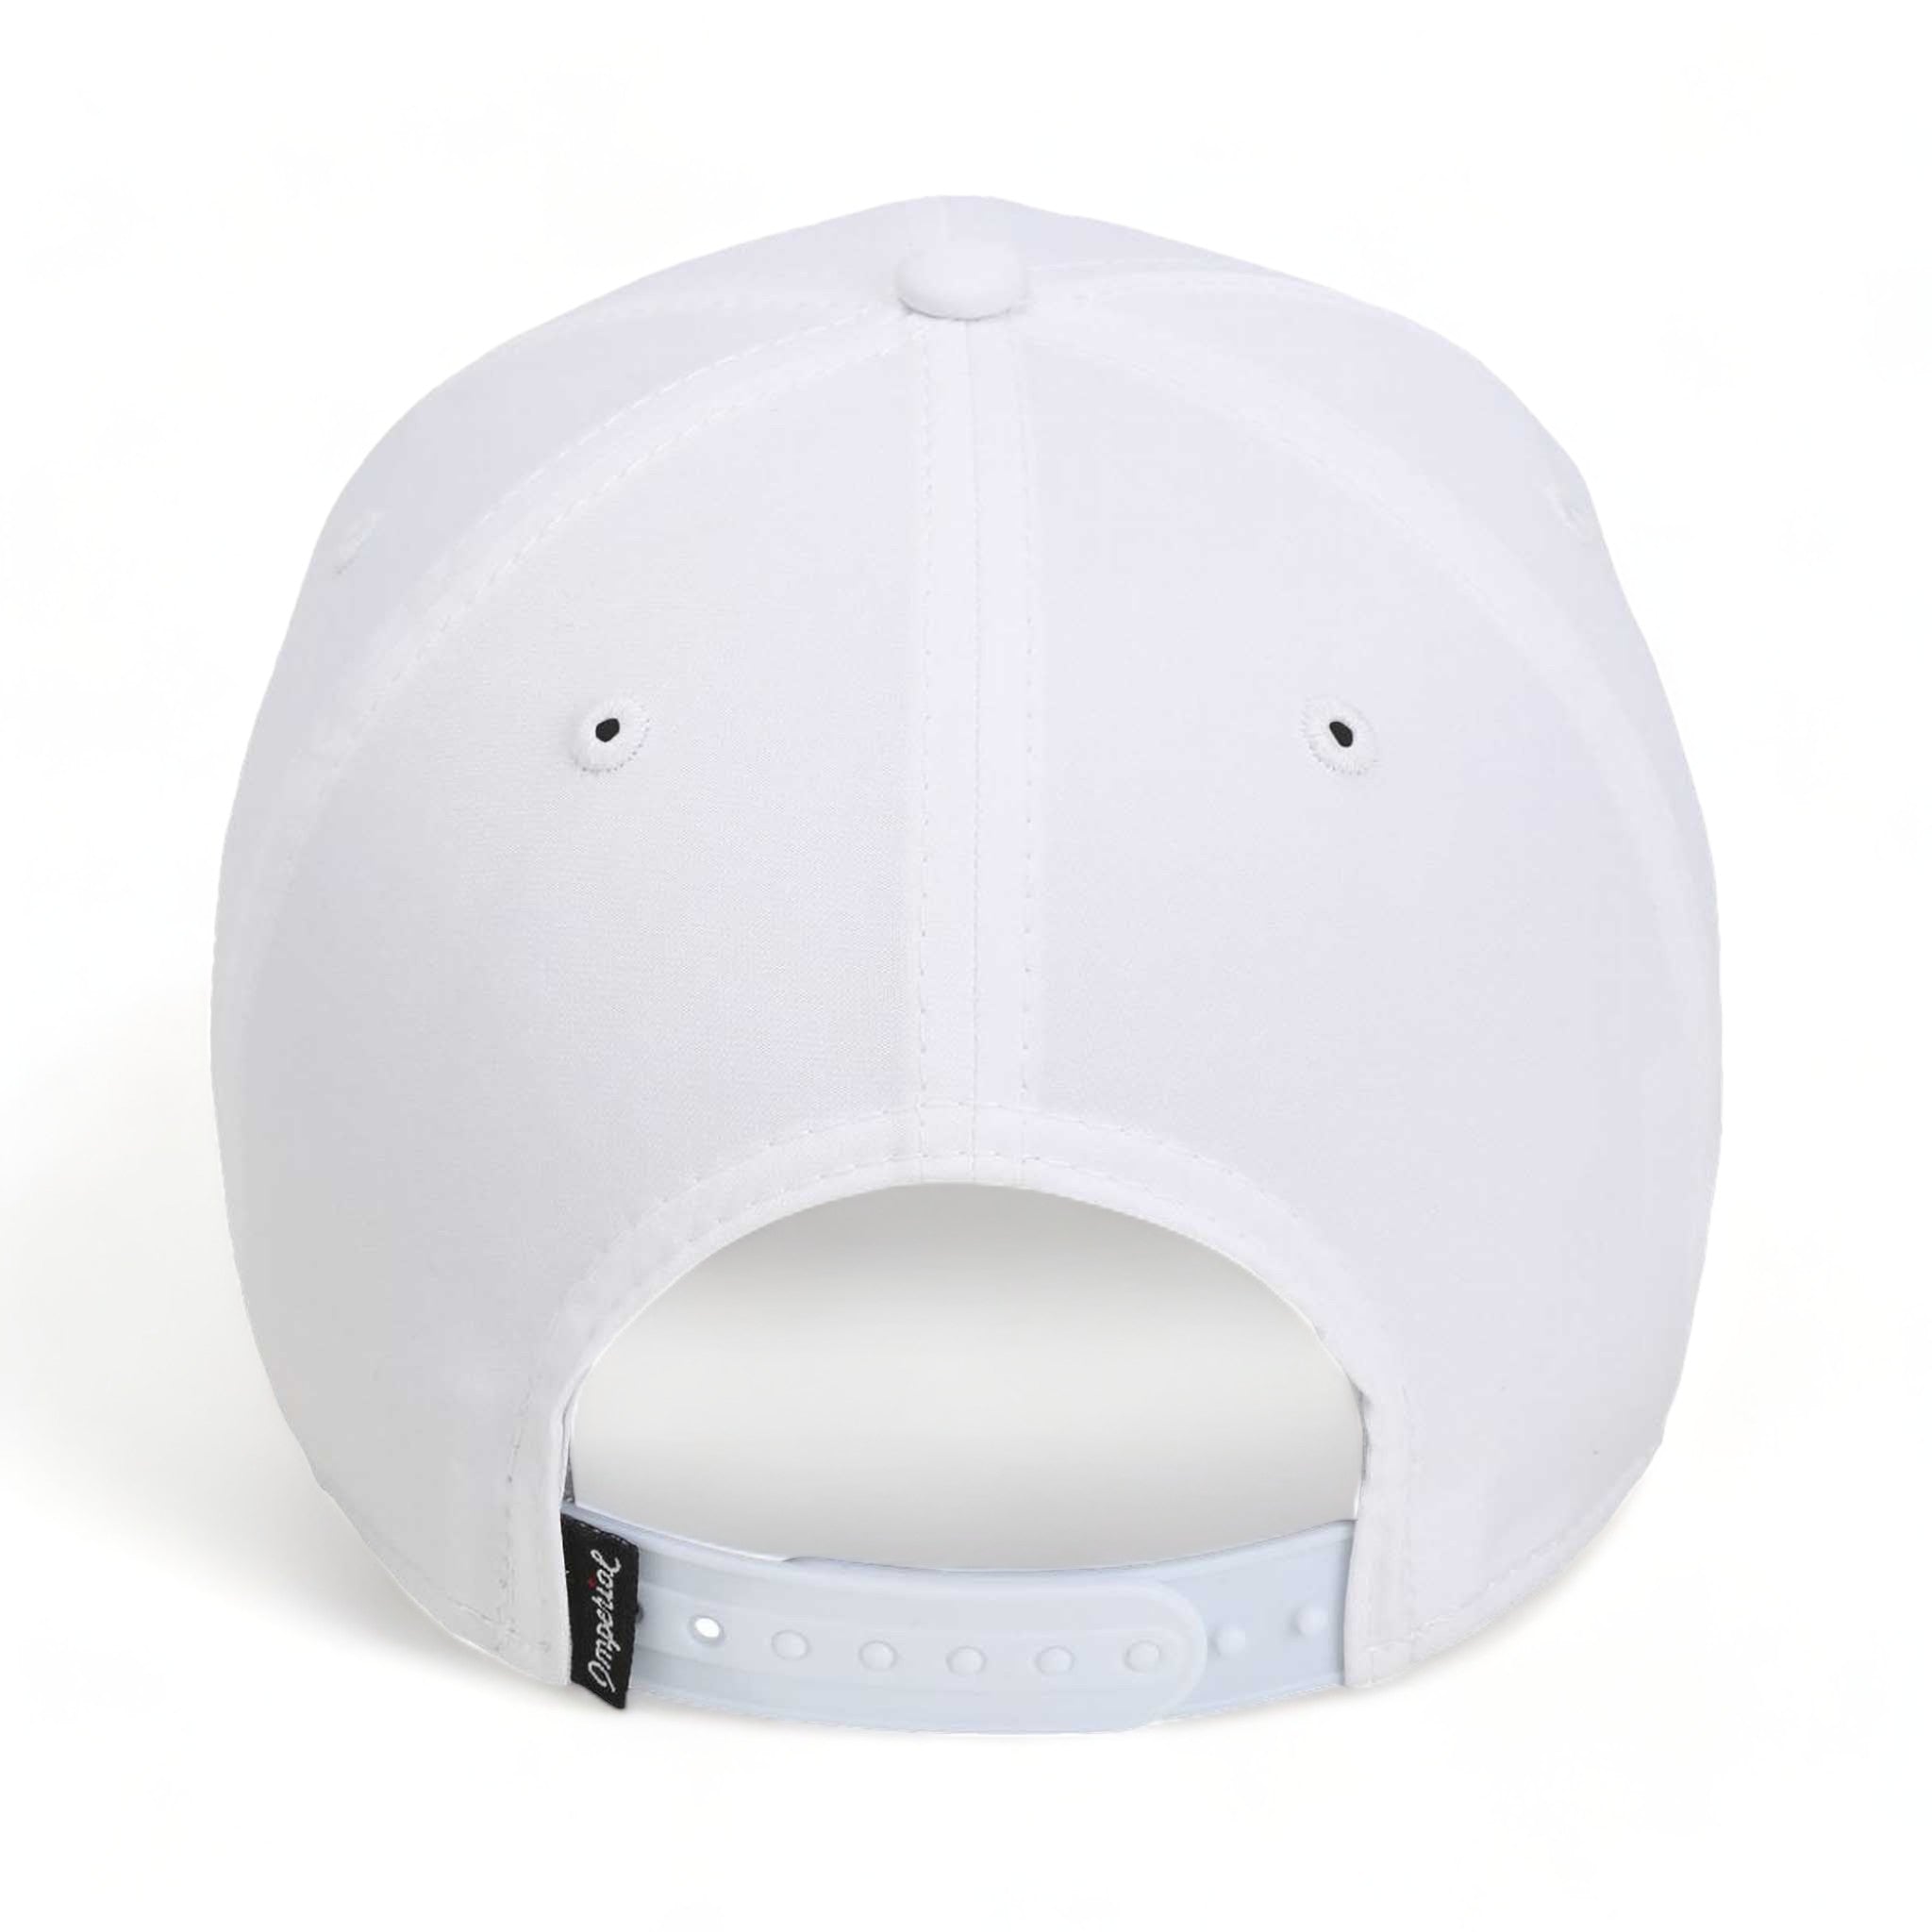 Back view of Imperial 7054 custom hat in white and navy